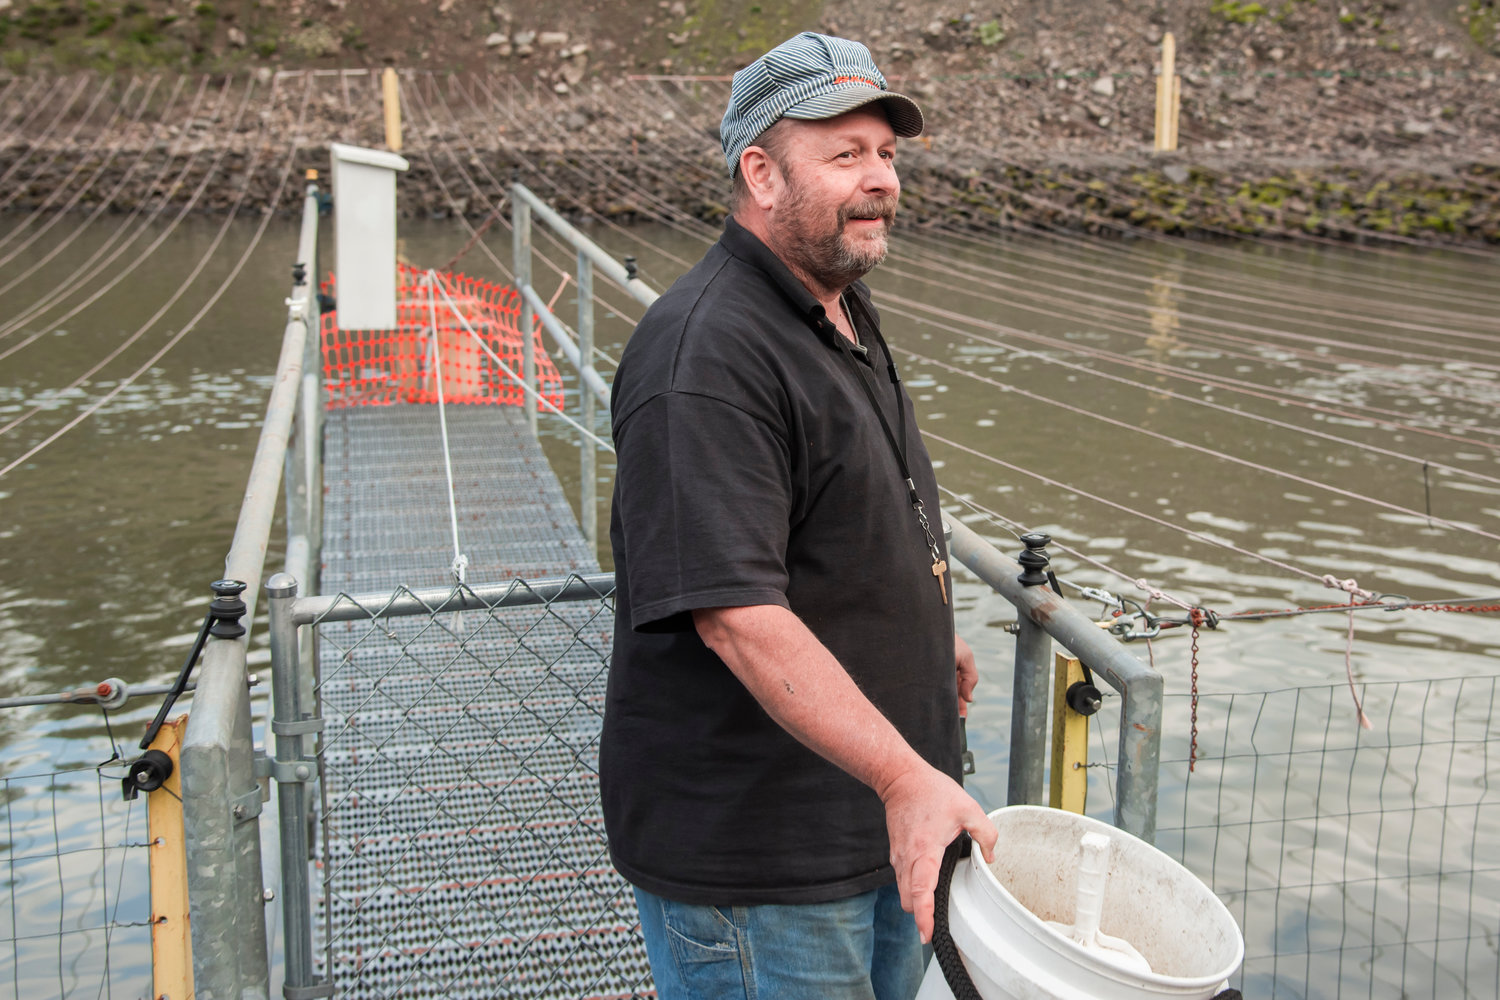 Alan Boerner, a hydro operator with TransAlta, smiles while feeding salmon in a rearing pond at the Skookumchuck Dam Wednesday in Thurston County.